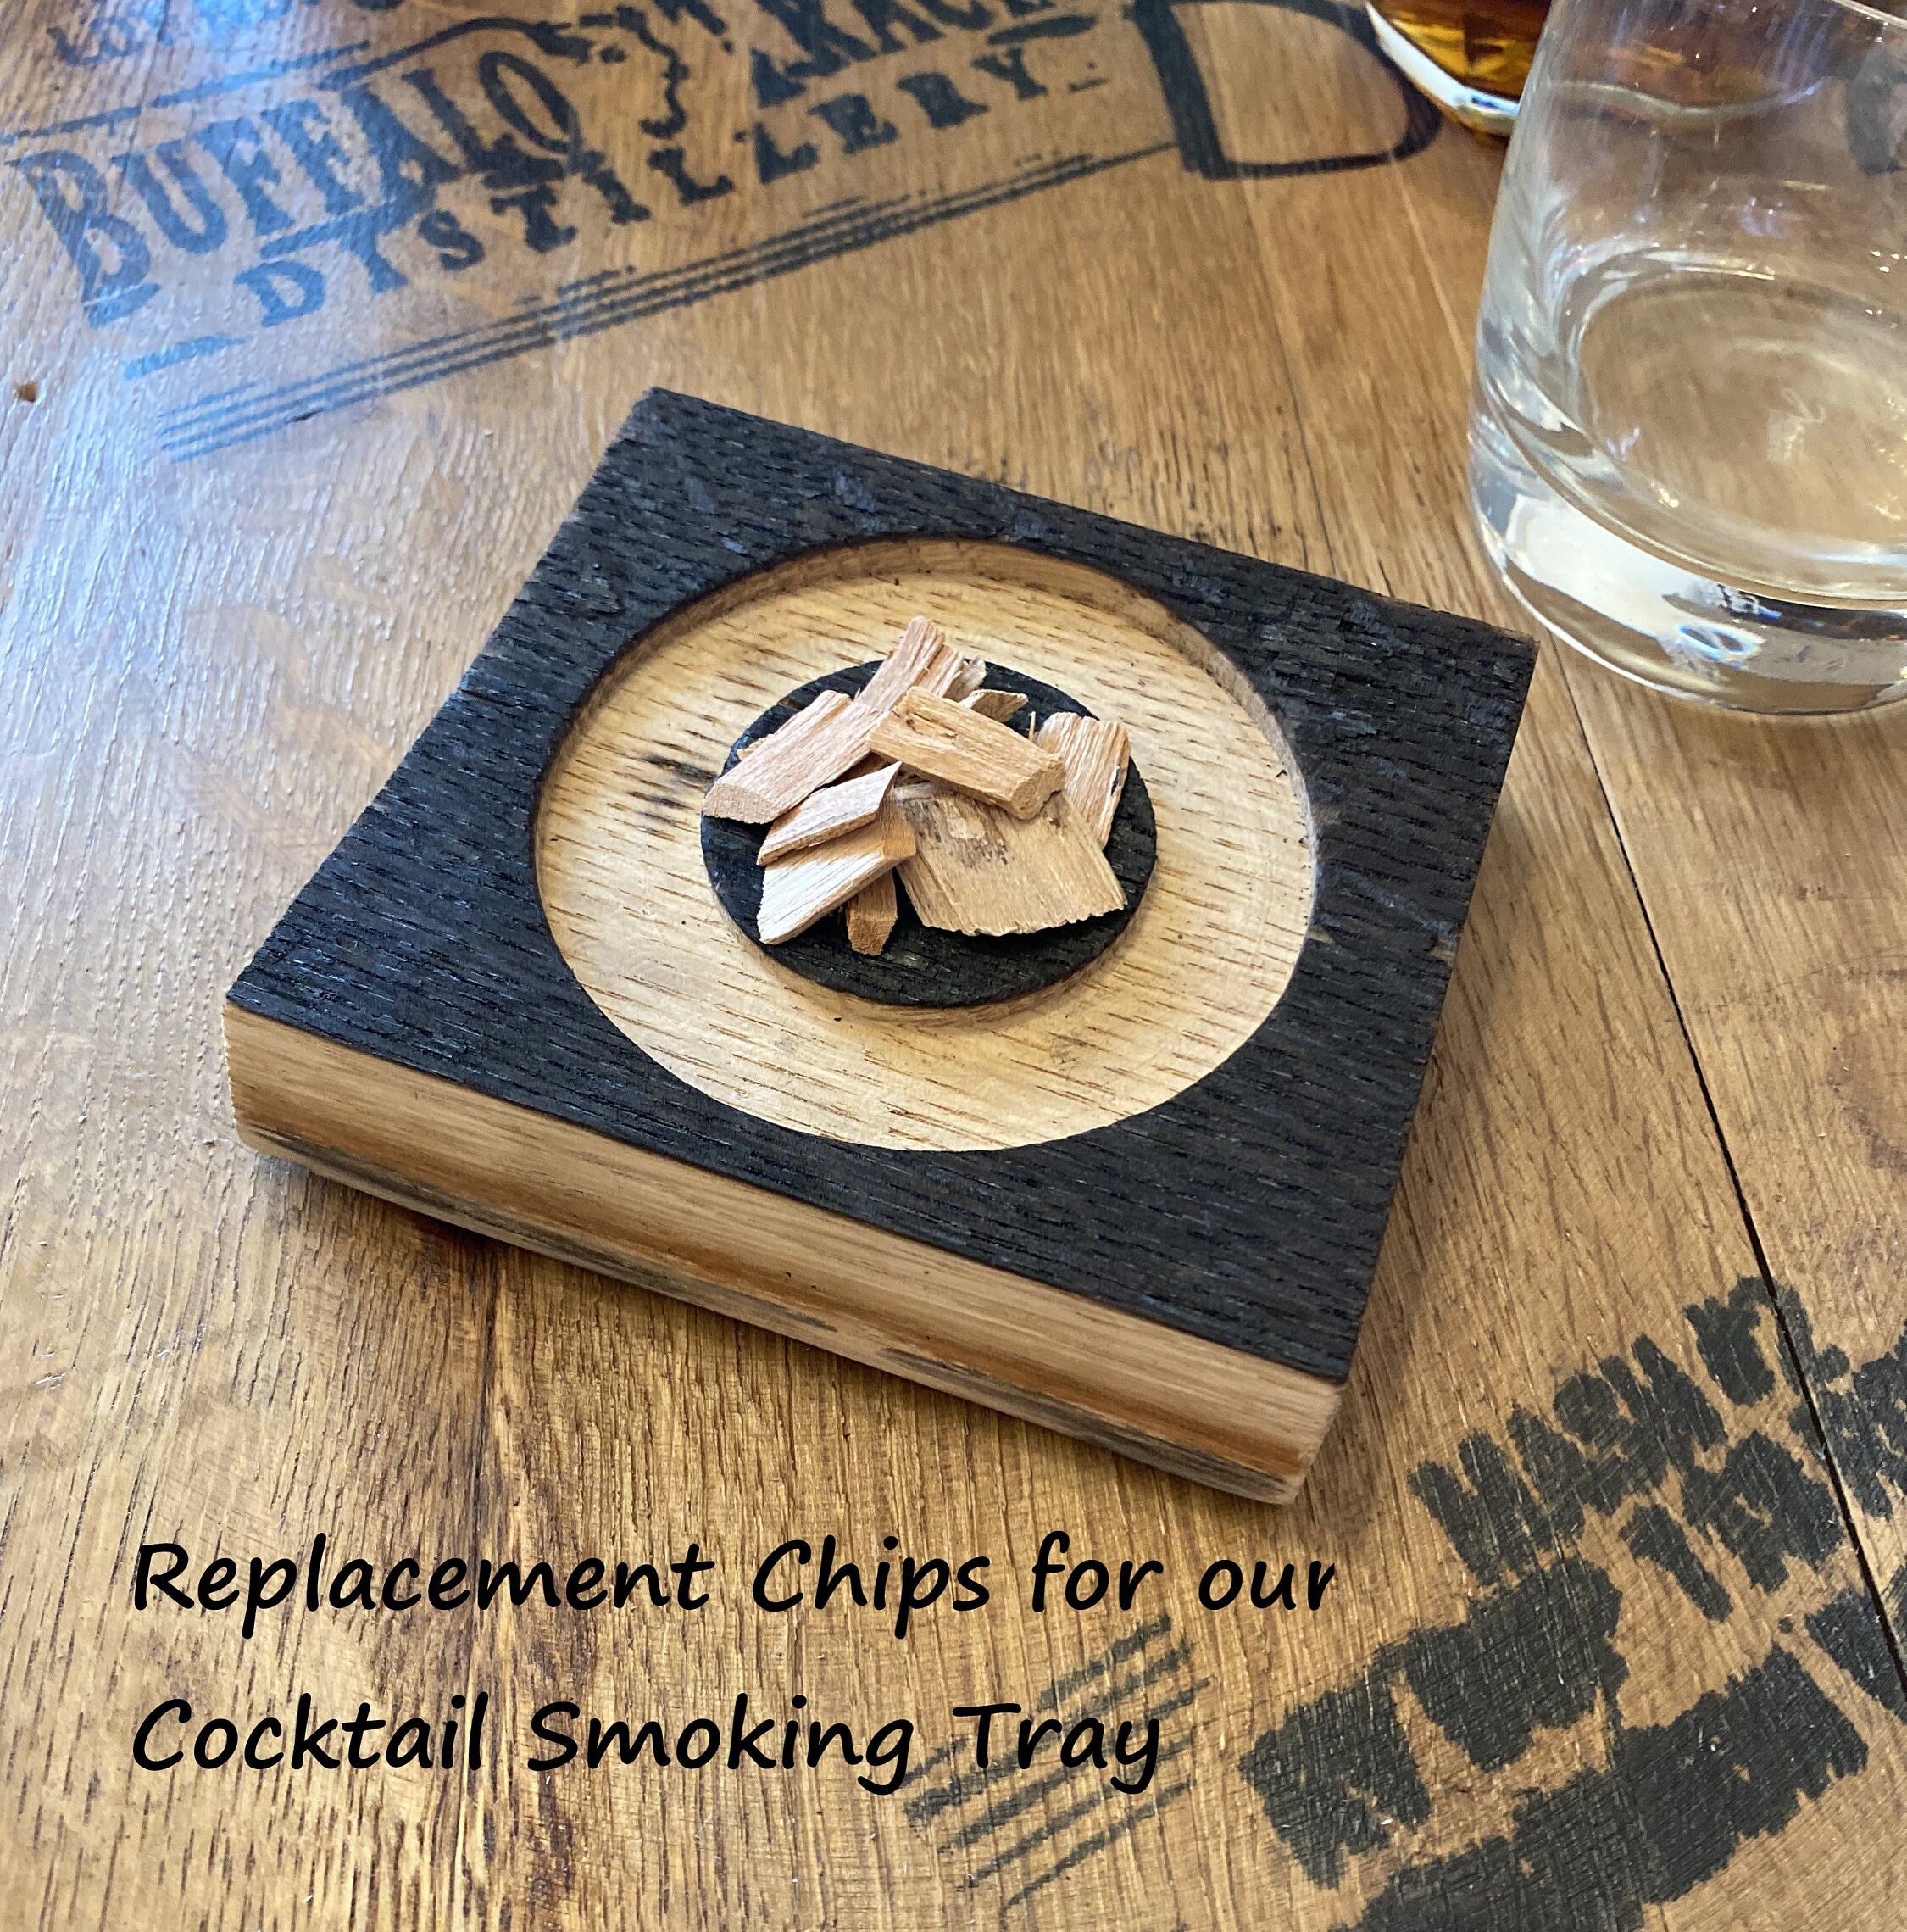 Cocktail Kit Smoking Chips - For Use With Barrel Stave Smoking Tray